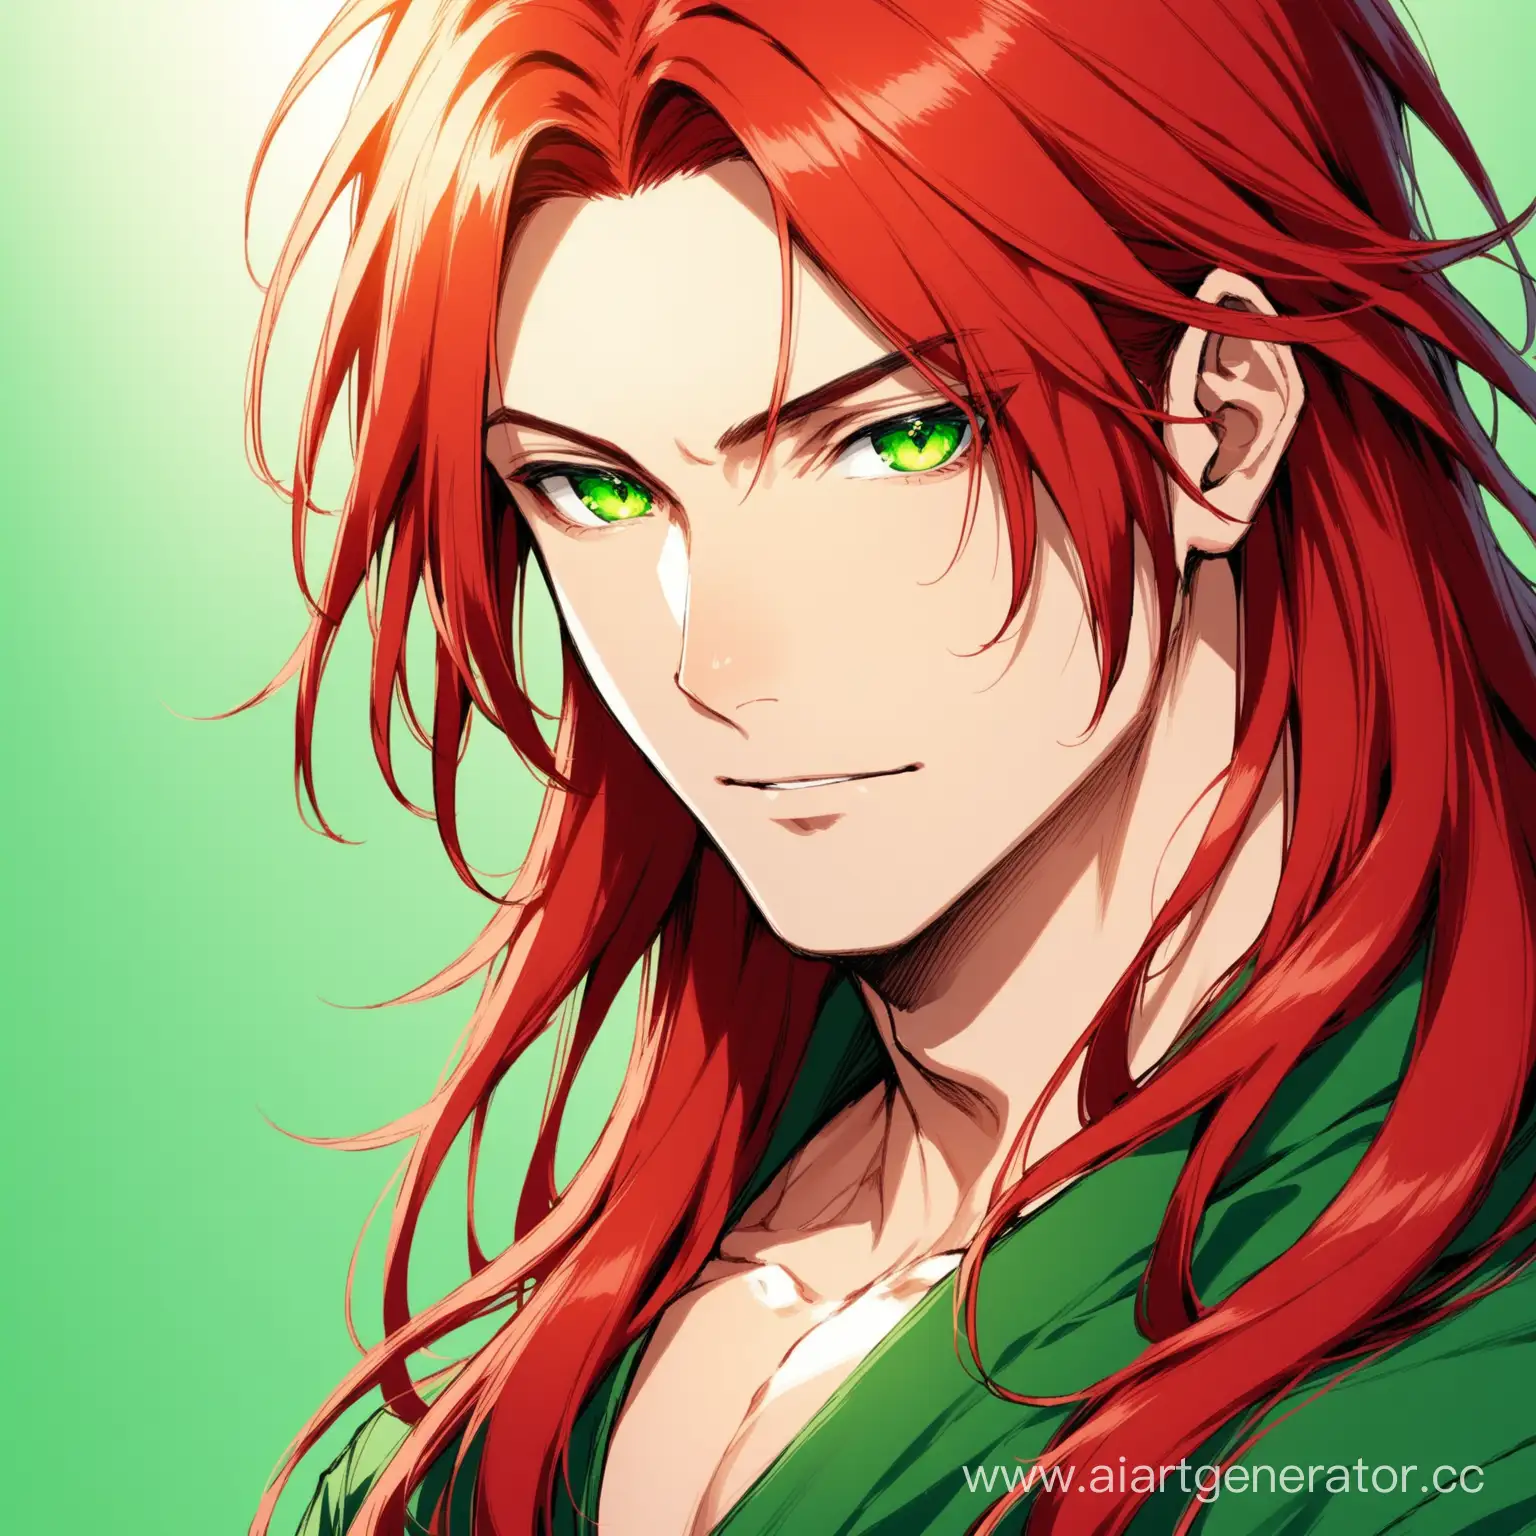 Portrait-of-a-Man-with-Long-Red-Hair-and-Green-Eyes